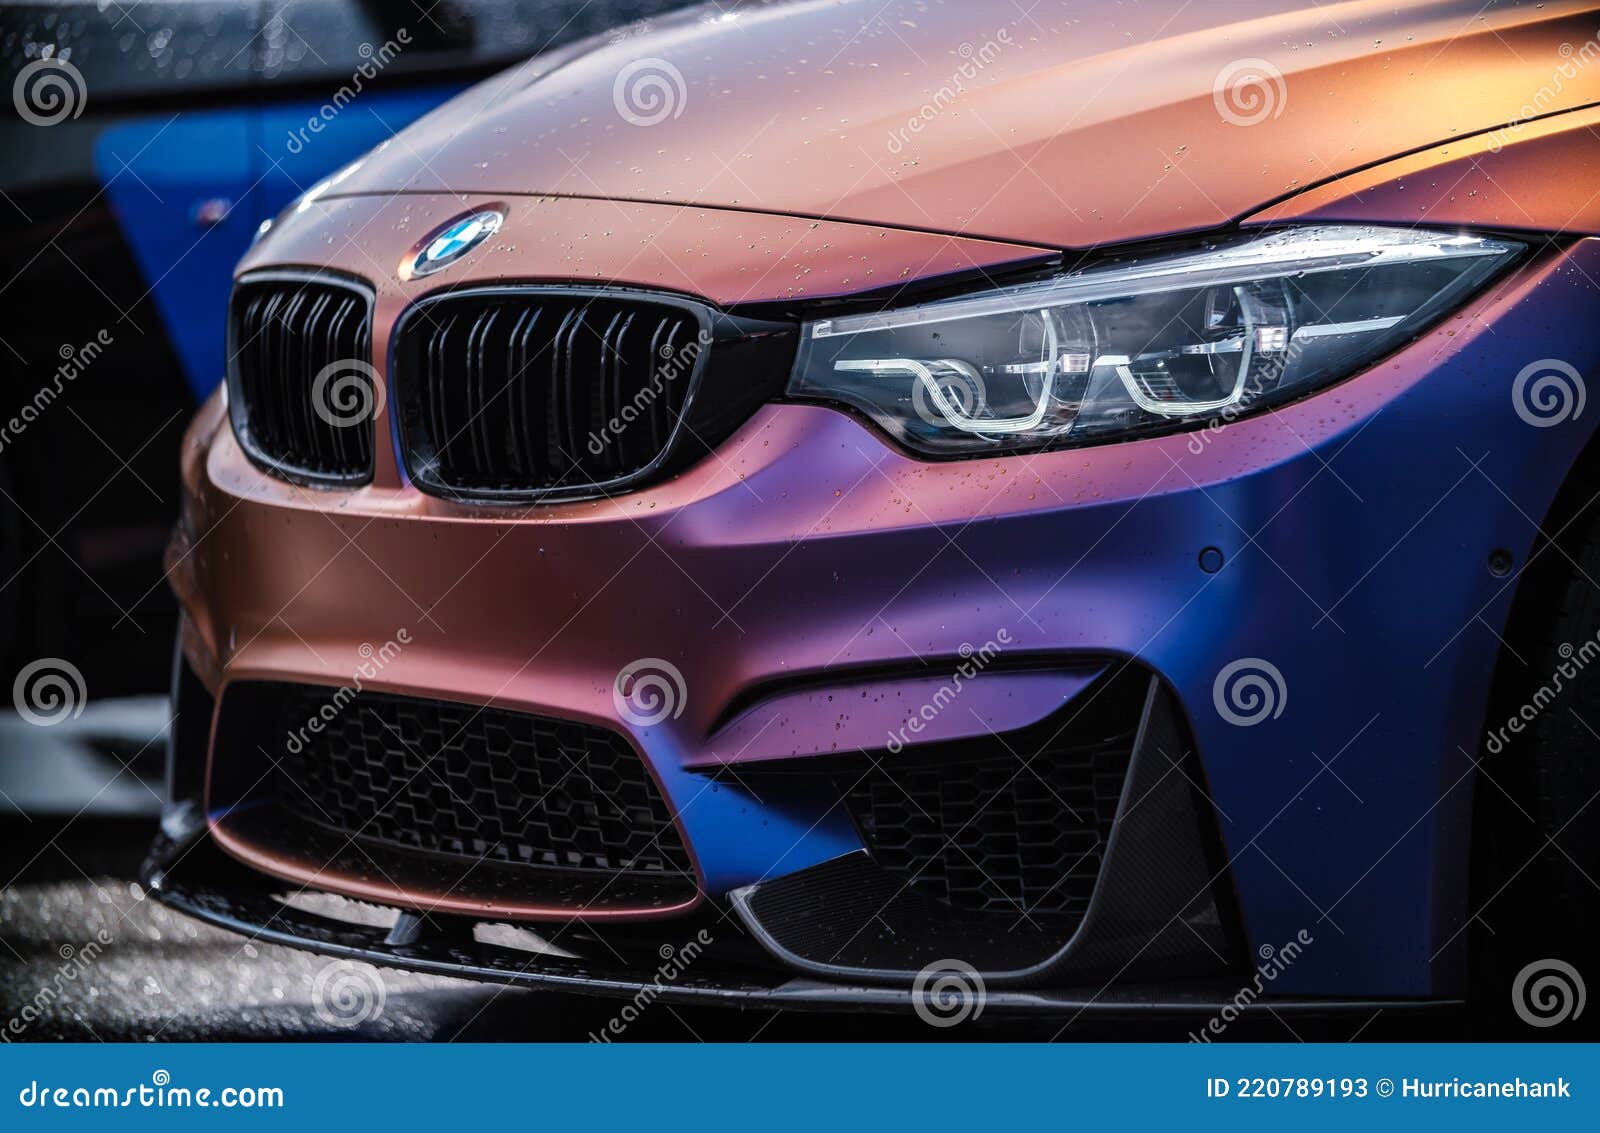 BMW M3 F80 Vehicle Wrapped in Purple Matte Chameleon Vinyl Wrap,equipped with Custom Wide Kit with Carbon Stock Photo - Image of motorsport, orange: 220789193